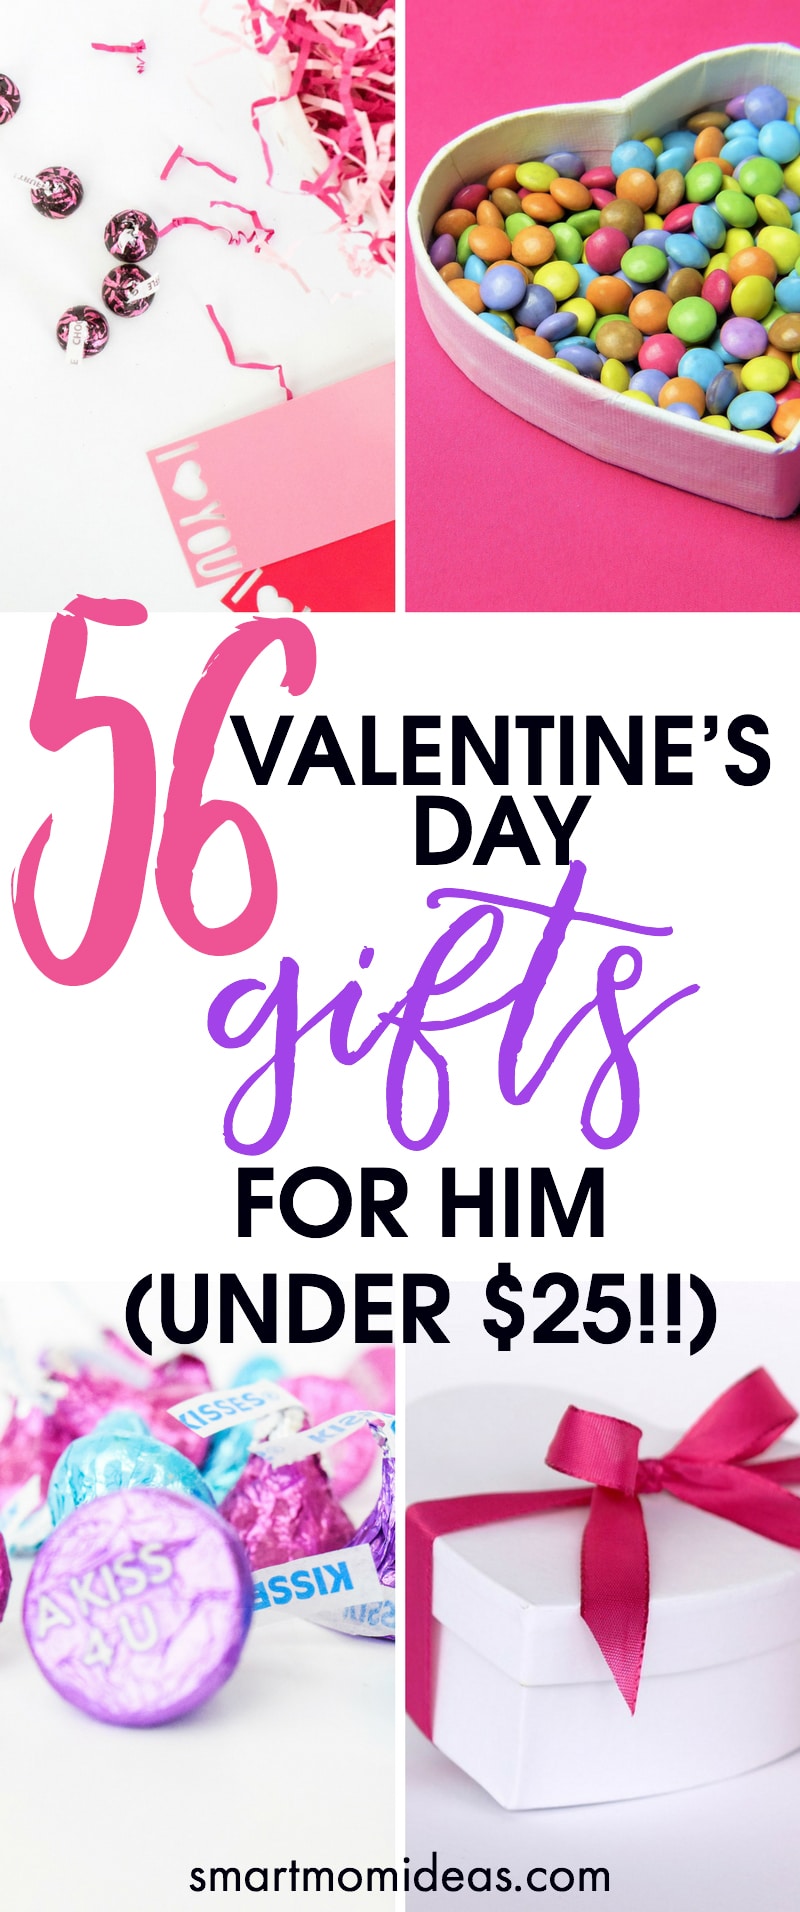 56 valentine's day gifts for him under $25 | smart mom ideas